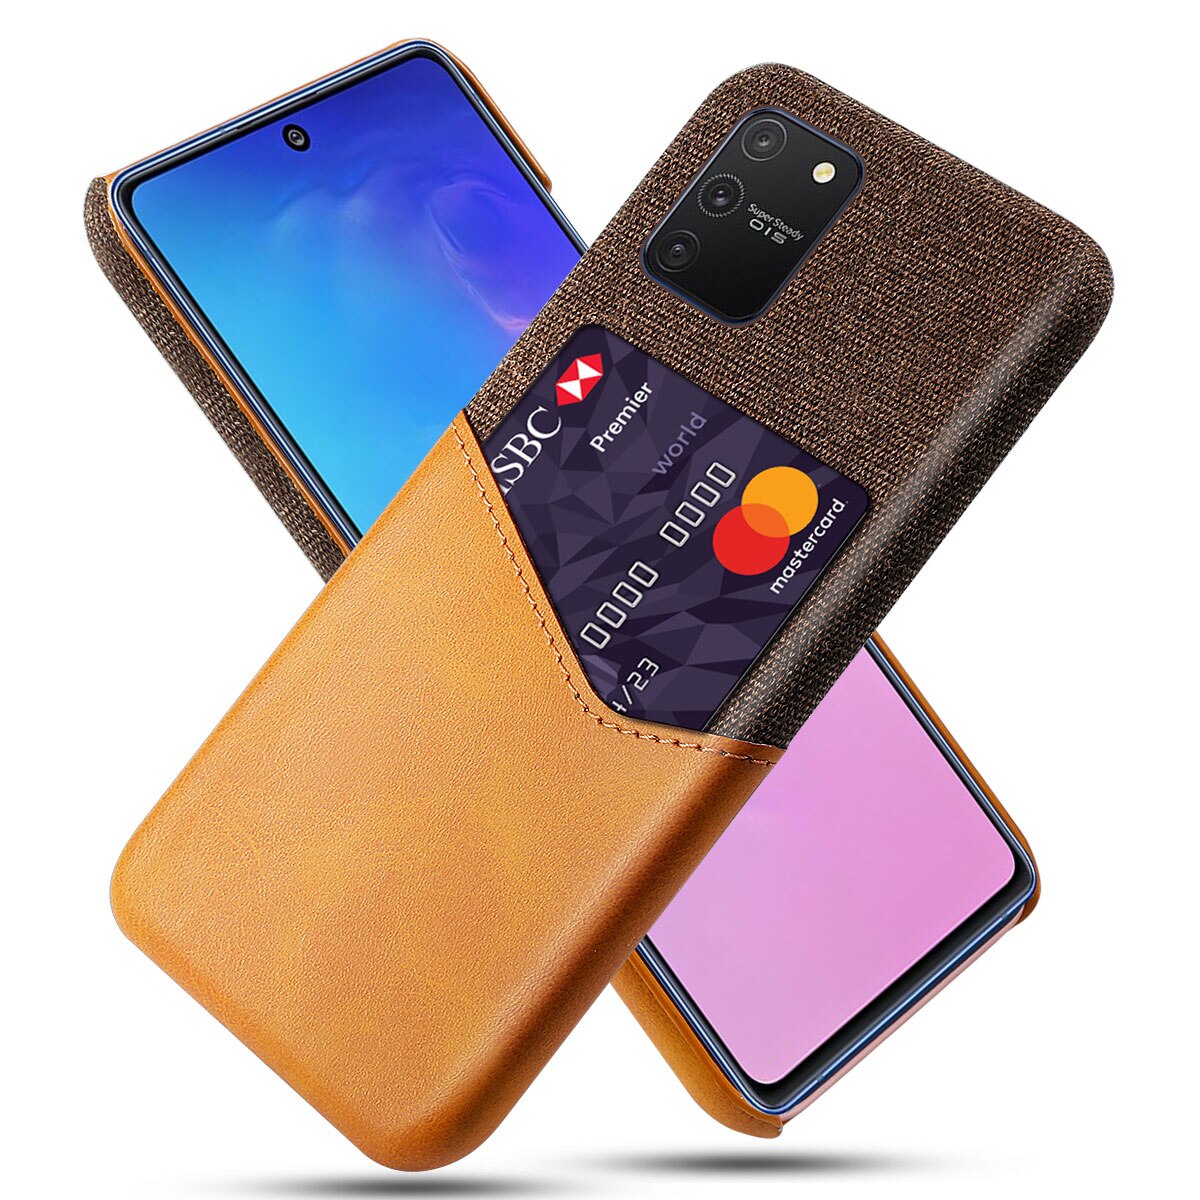 Samsung Galaxy S10 Lite leather back cover with card holder slot